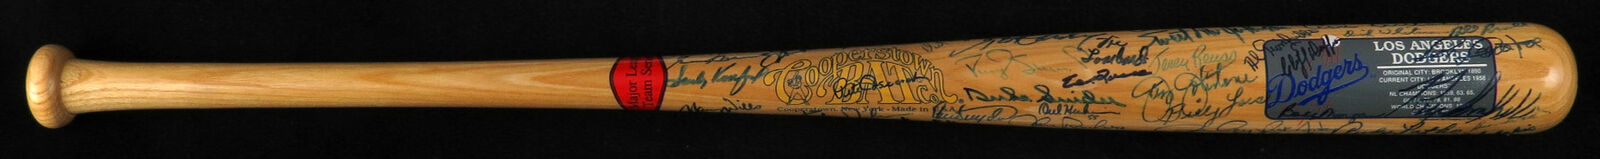 The Finest Brooklyn Los Angeles Dodgers Hall Of Fame Signed Bat 73 Sigs! PSA DNA